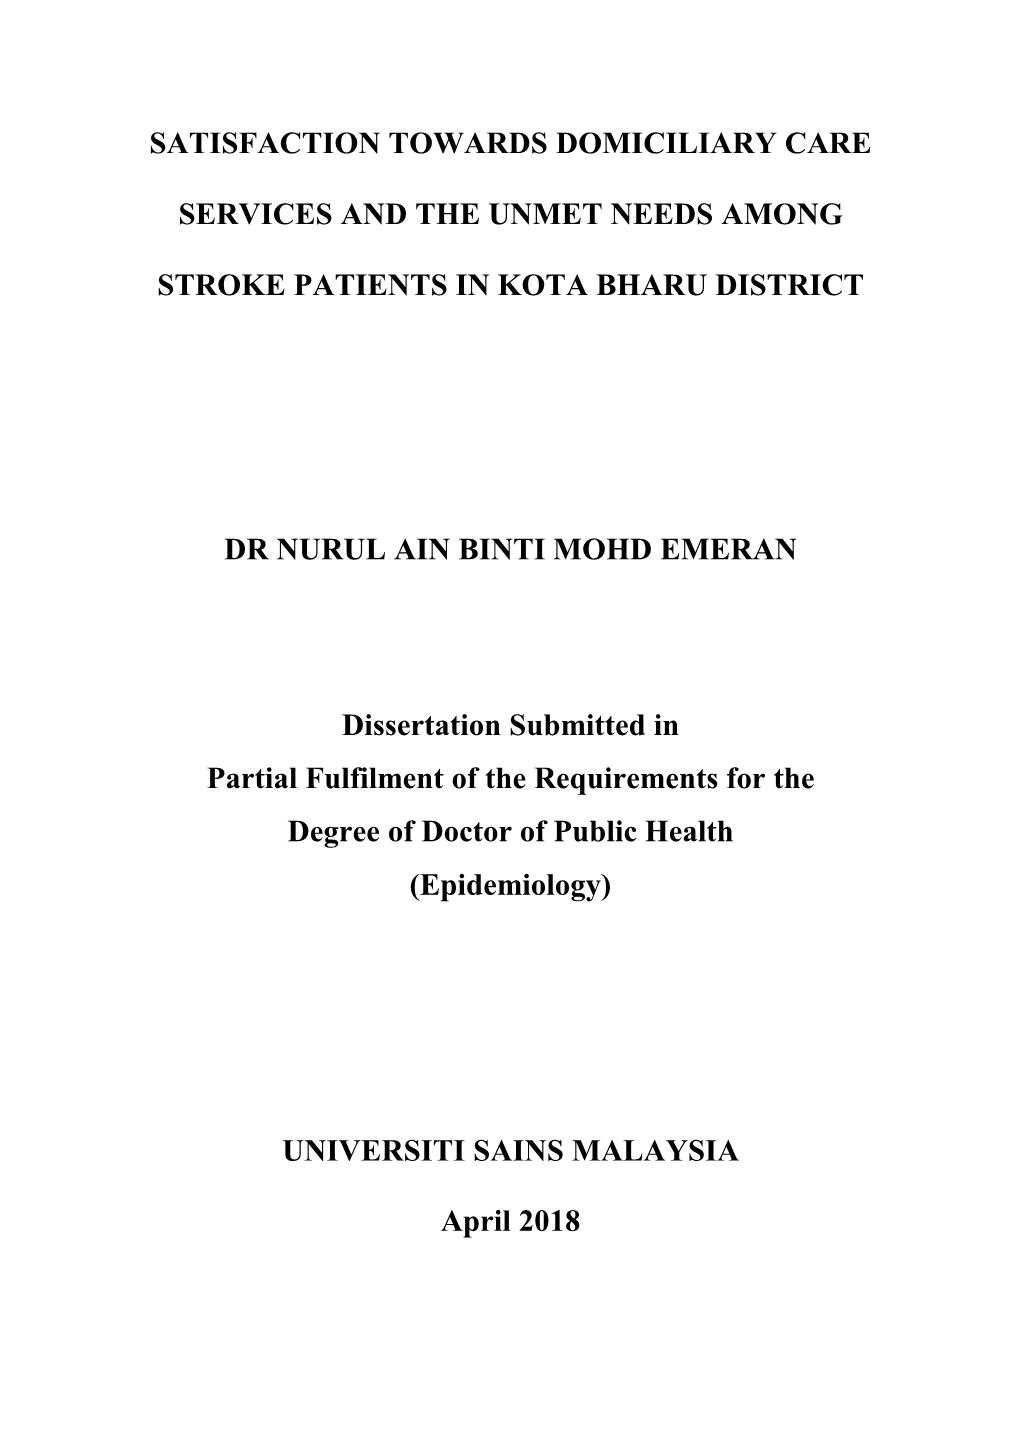 Satisfaction Towards Domiciliary Care Services and the Unmet Needs Among Stroke Patients in Kota Bharu District Dr Nurul Ain